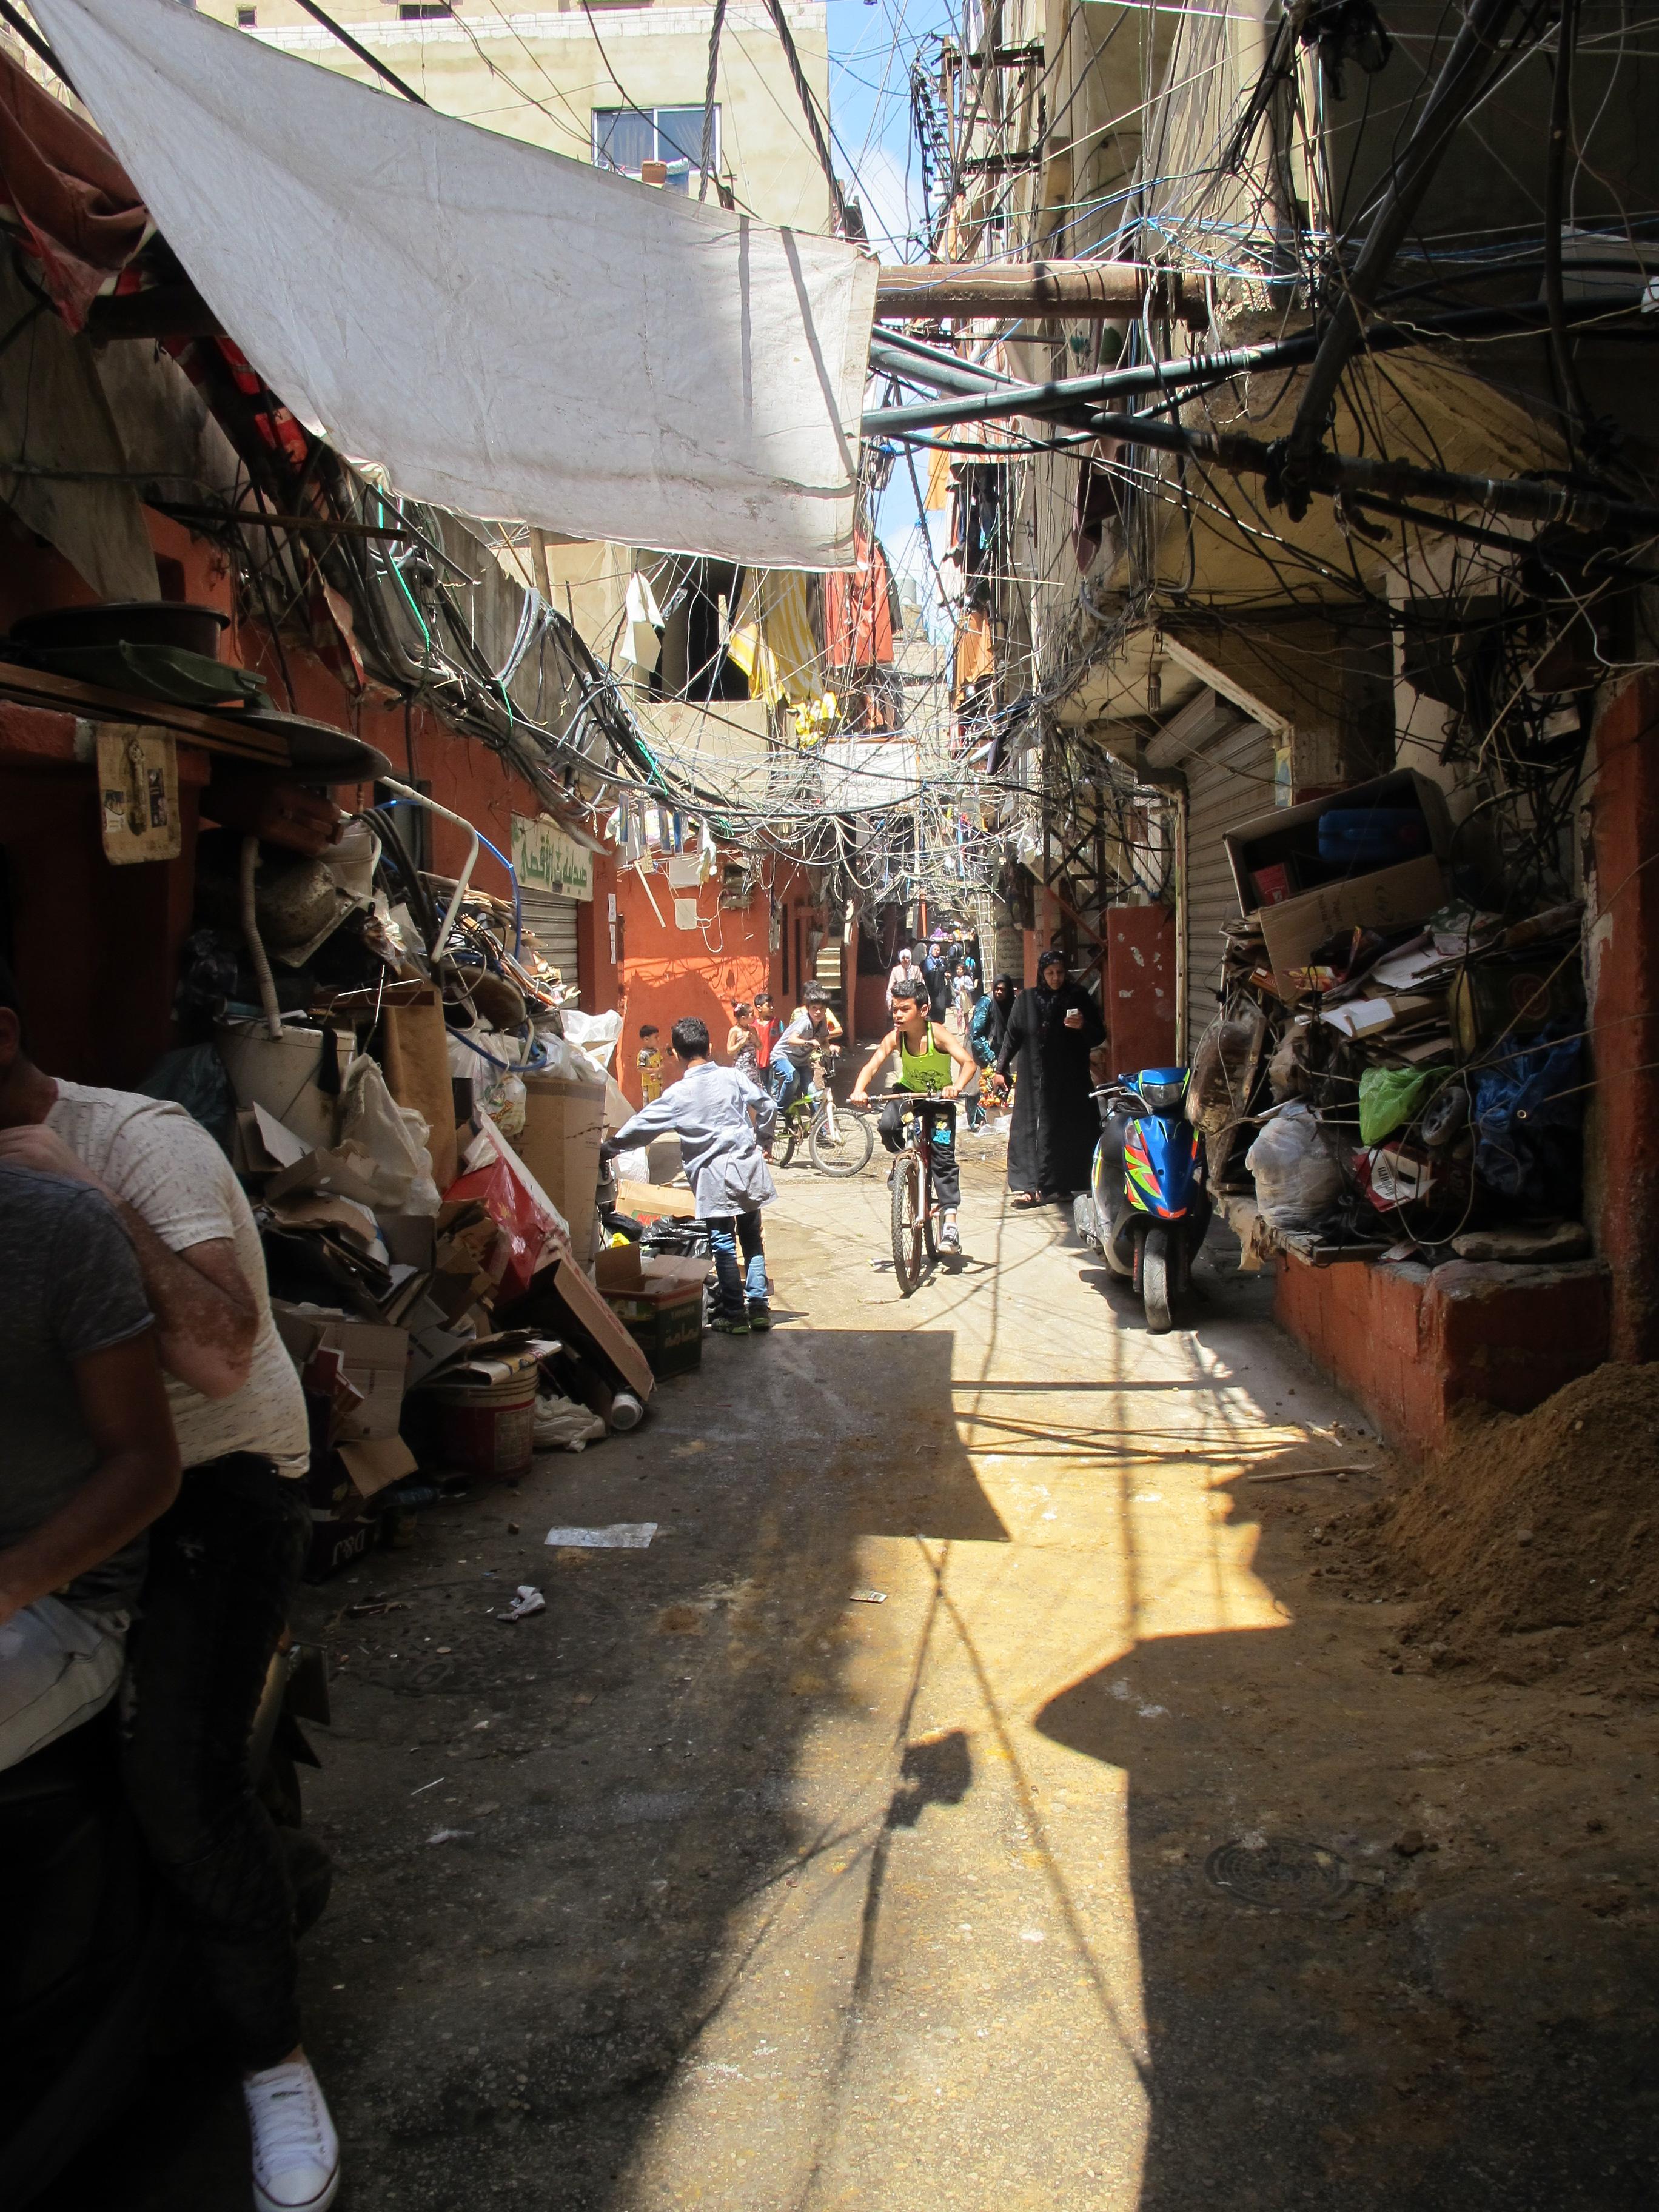 A corridor in a Palestinian refugee camp in Lebanon